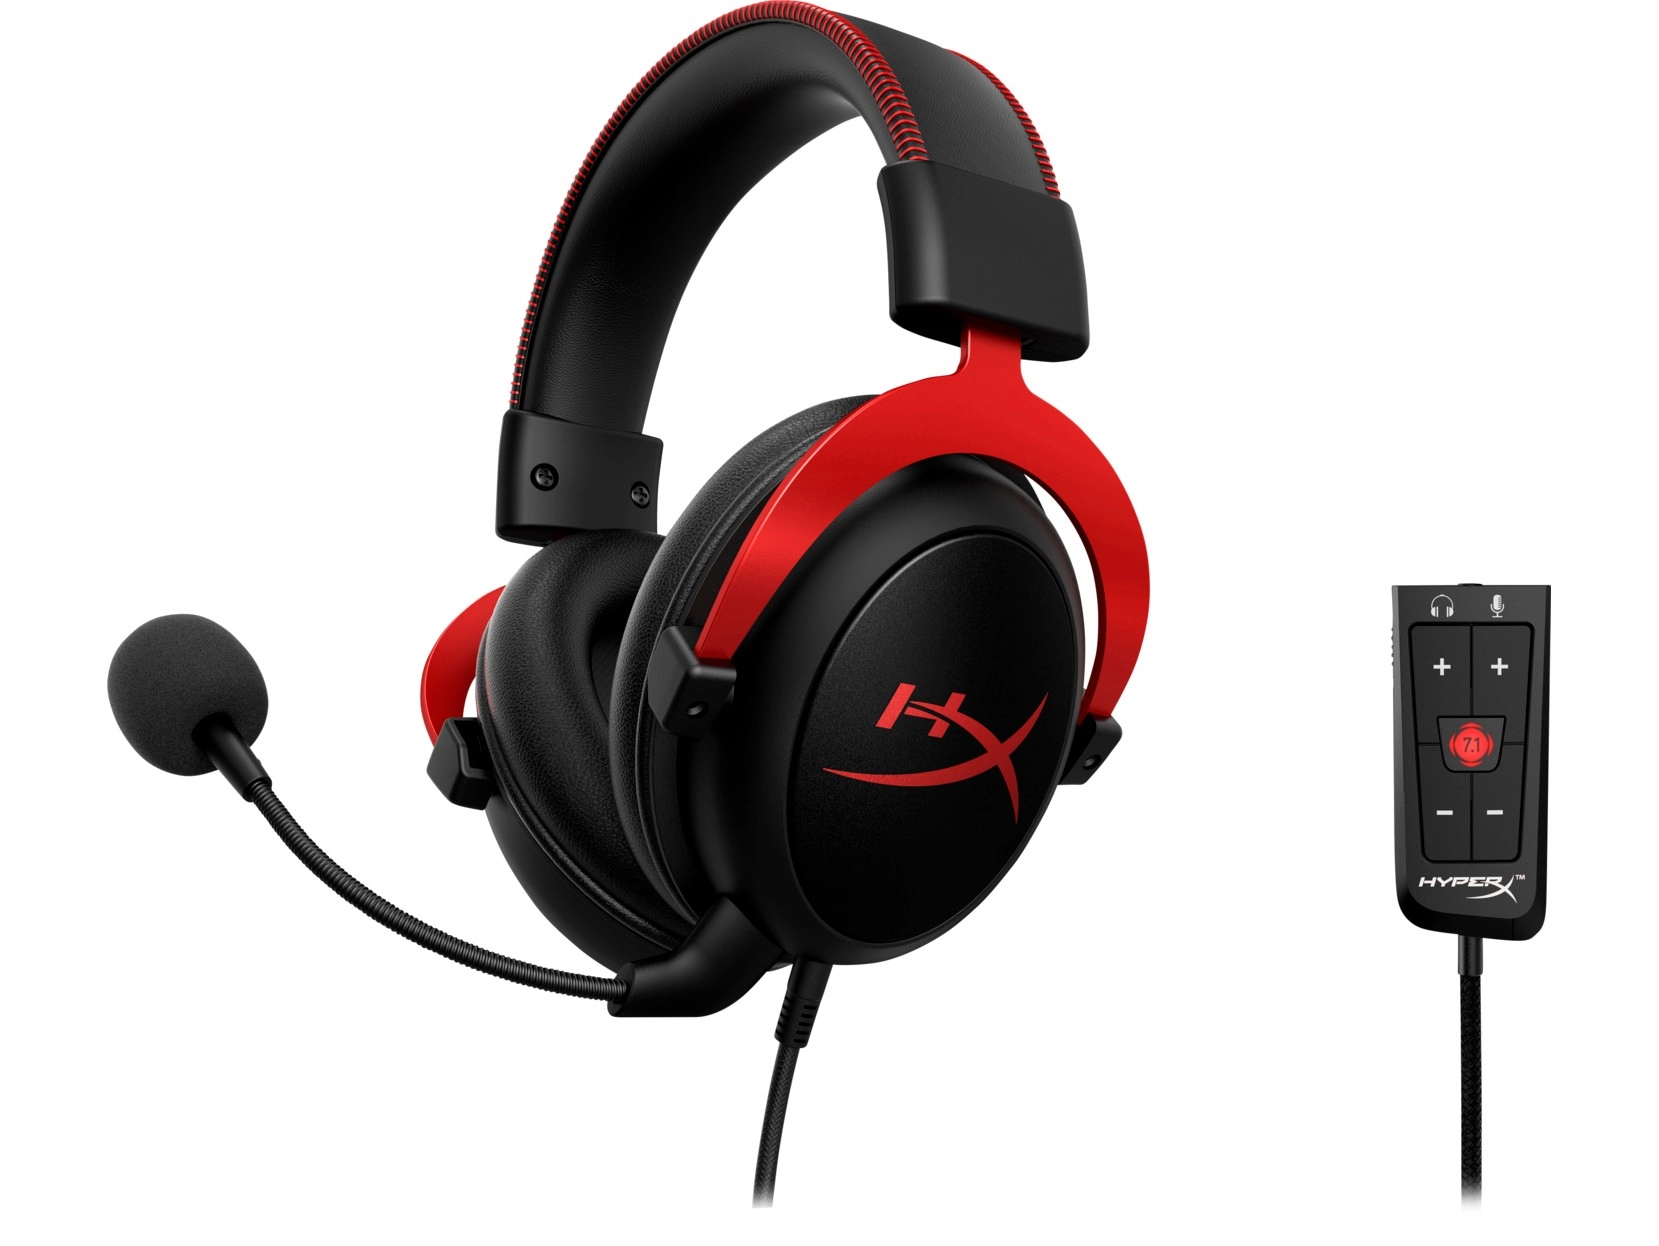 Headset  HyperX Cloud II, Red, Solid aluminium build, Microphone: detachable, USB Surround Sound 7.1, Frequency response: 15Hz–25,000 Hz, Cable length:1m+2m extension, 3.5 jack, Pure Hi-Fi capable, Braided cable,  Mesh bag